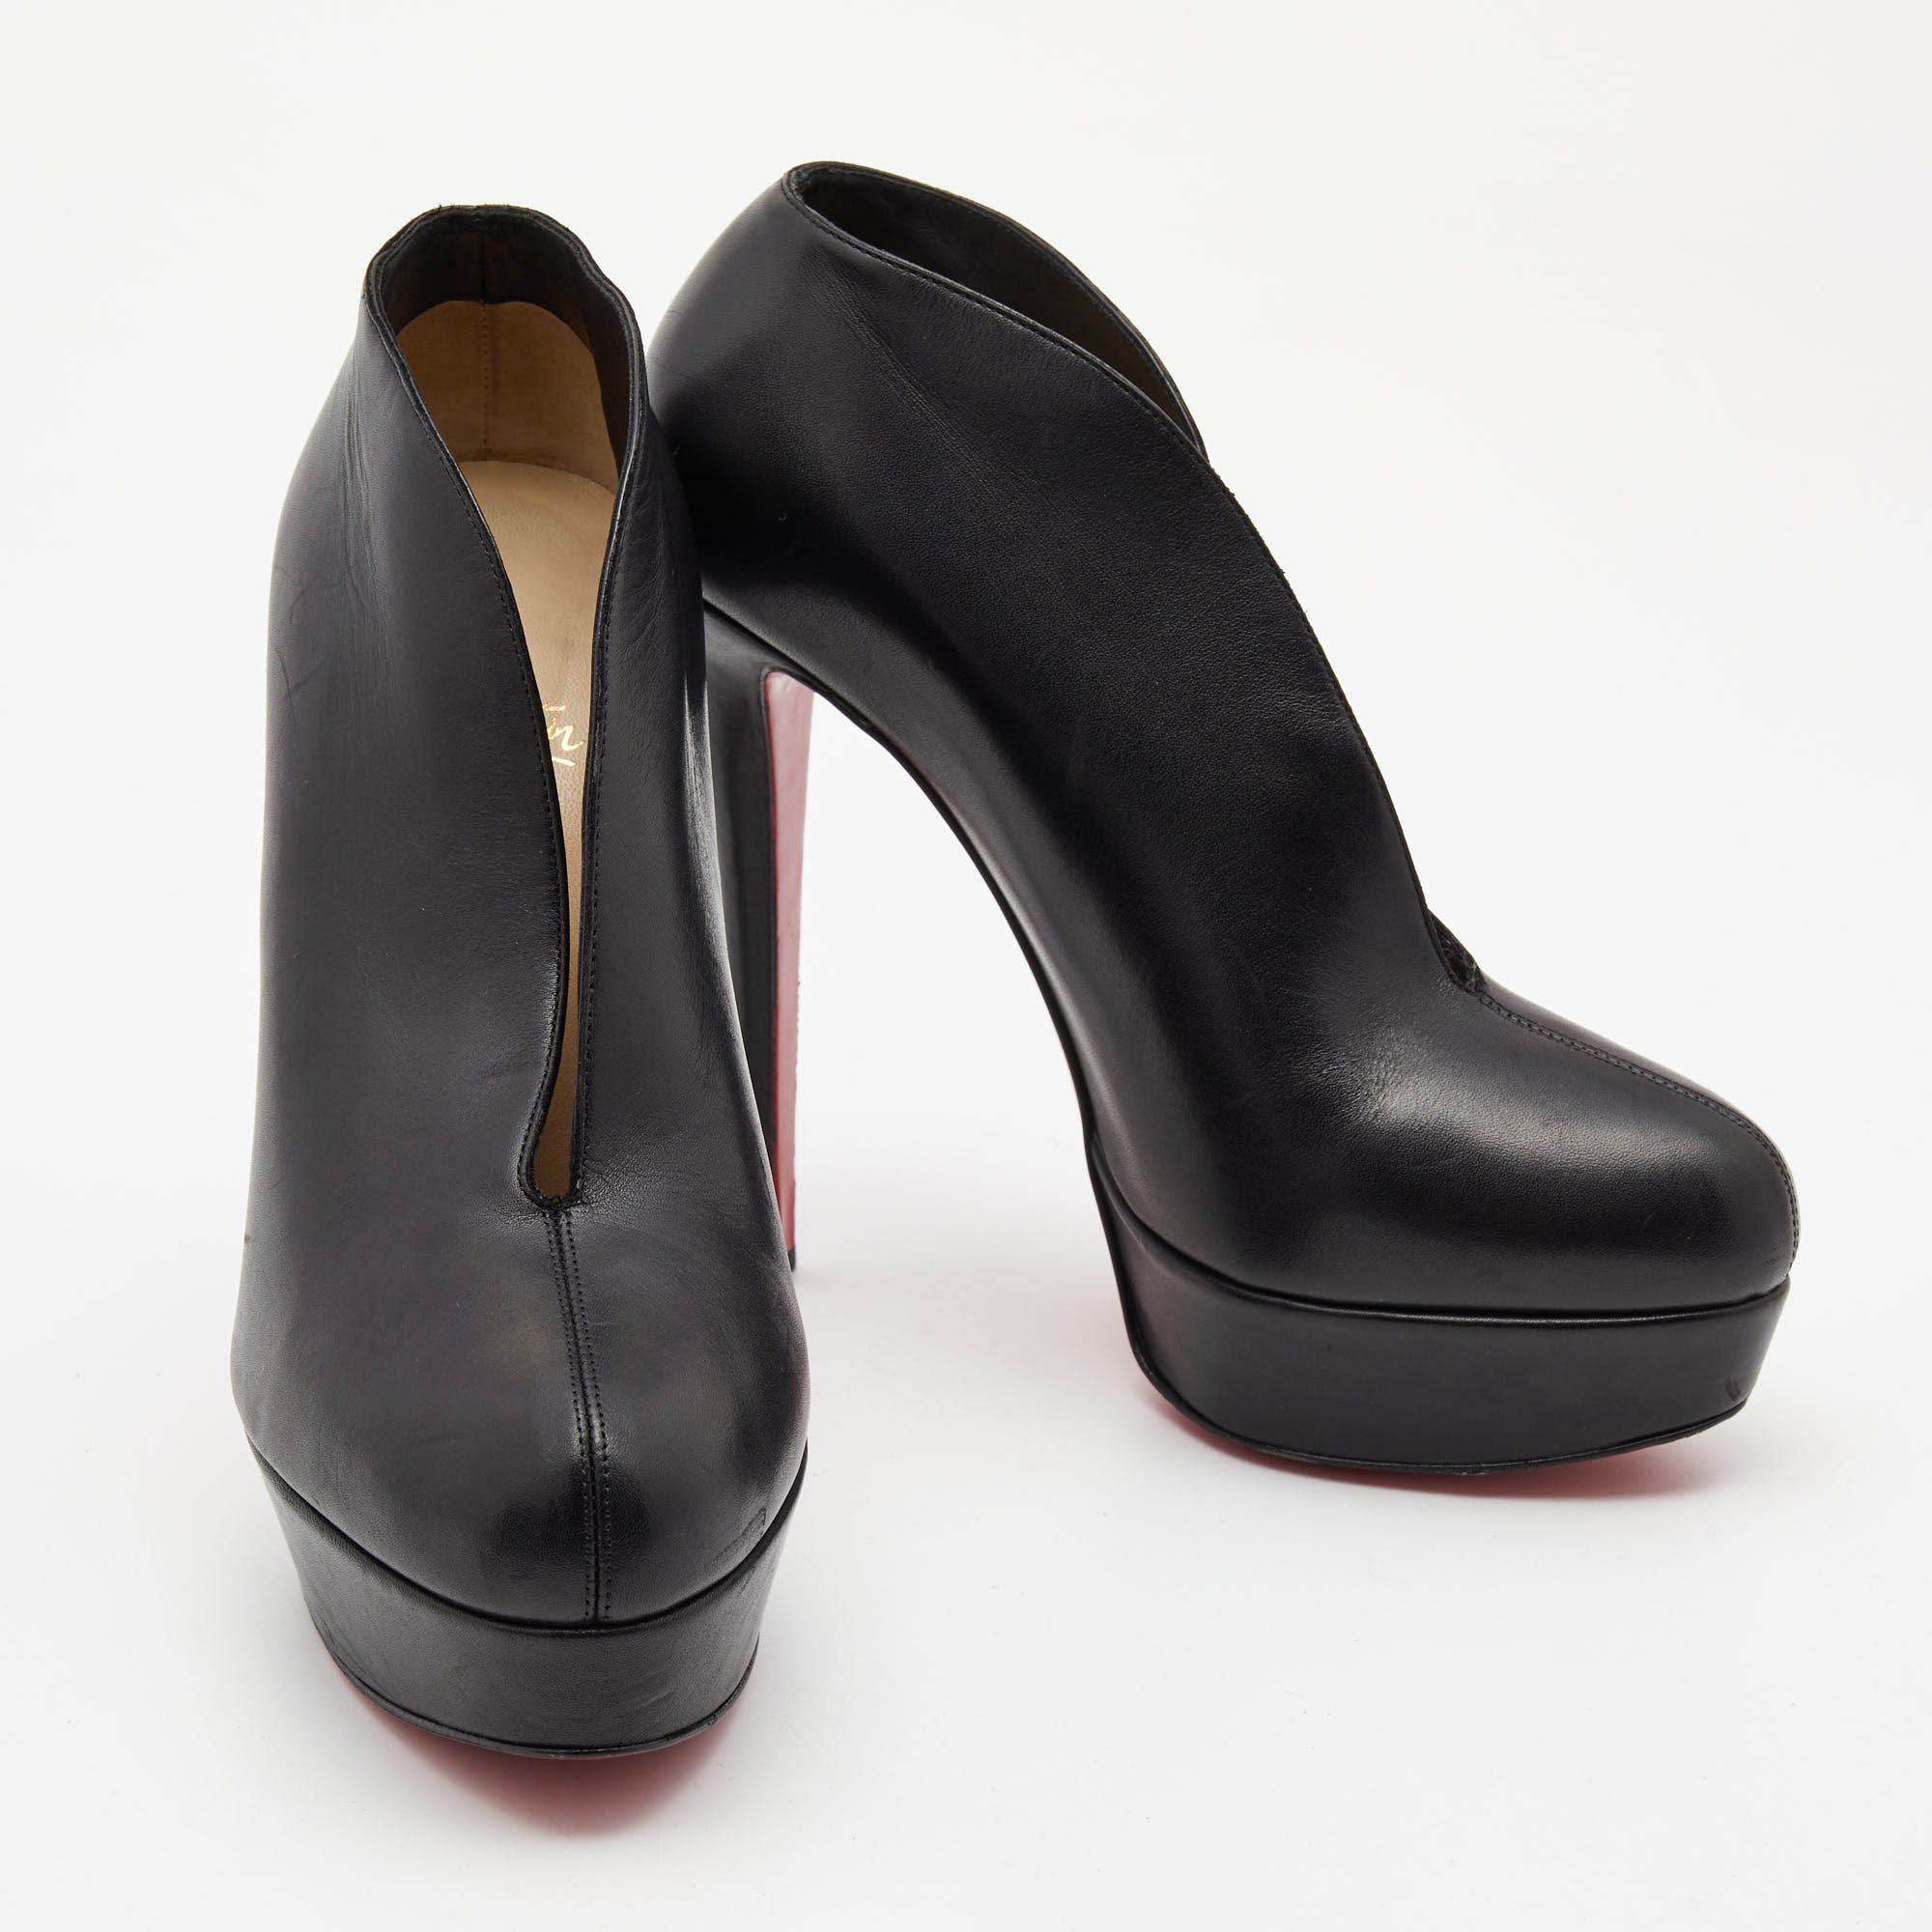 Christian Louboutin Black Leather Miss Fast Plato Platform Ankle Booties Size 38